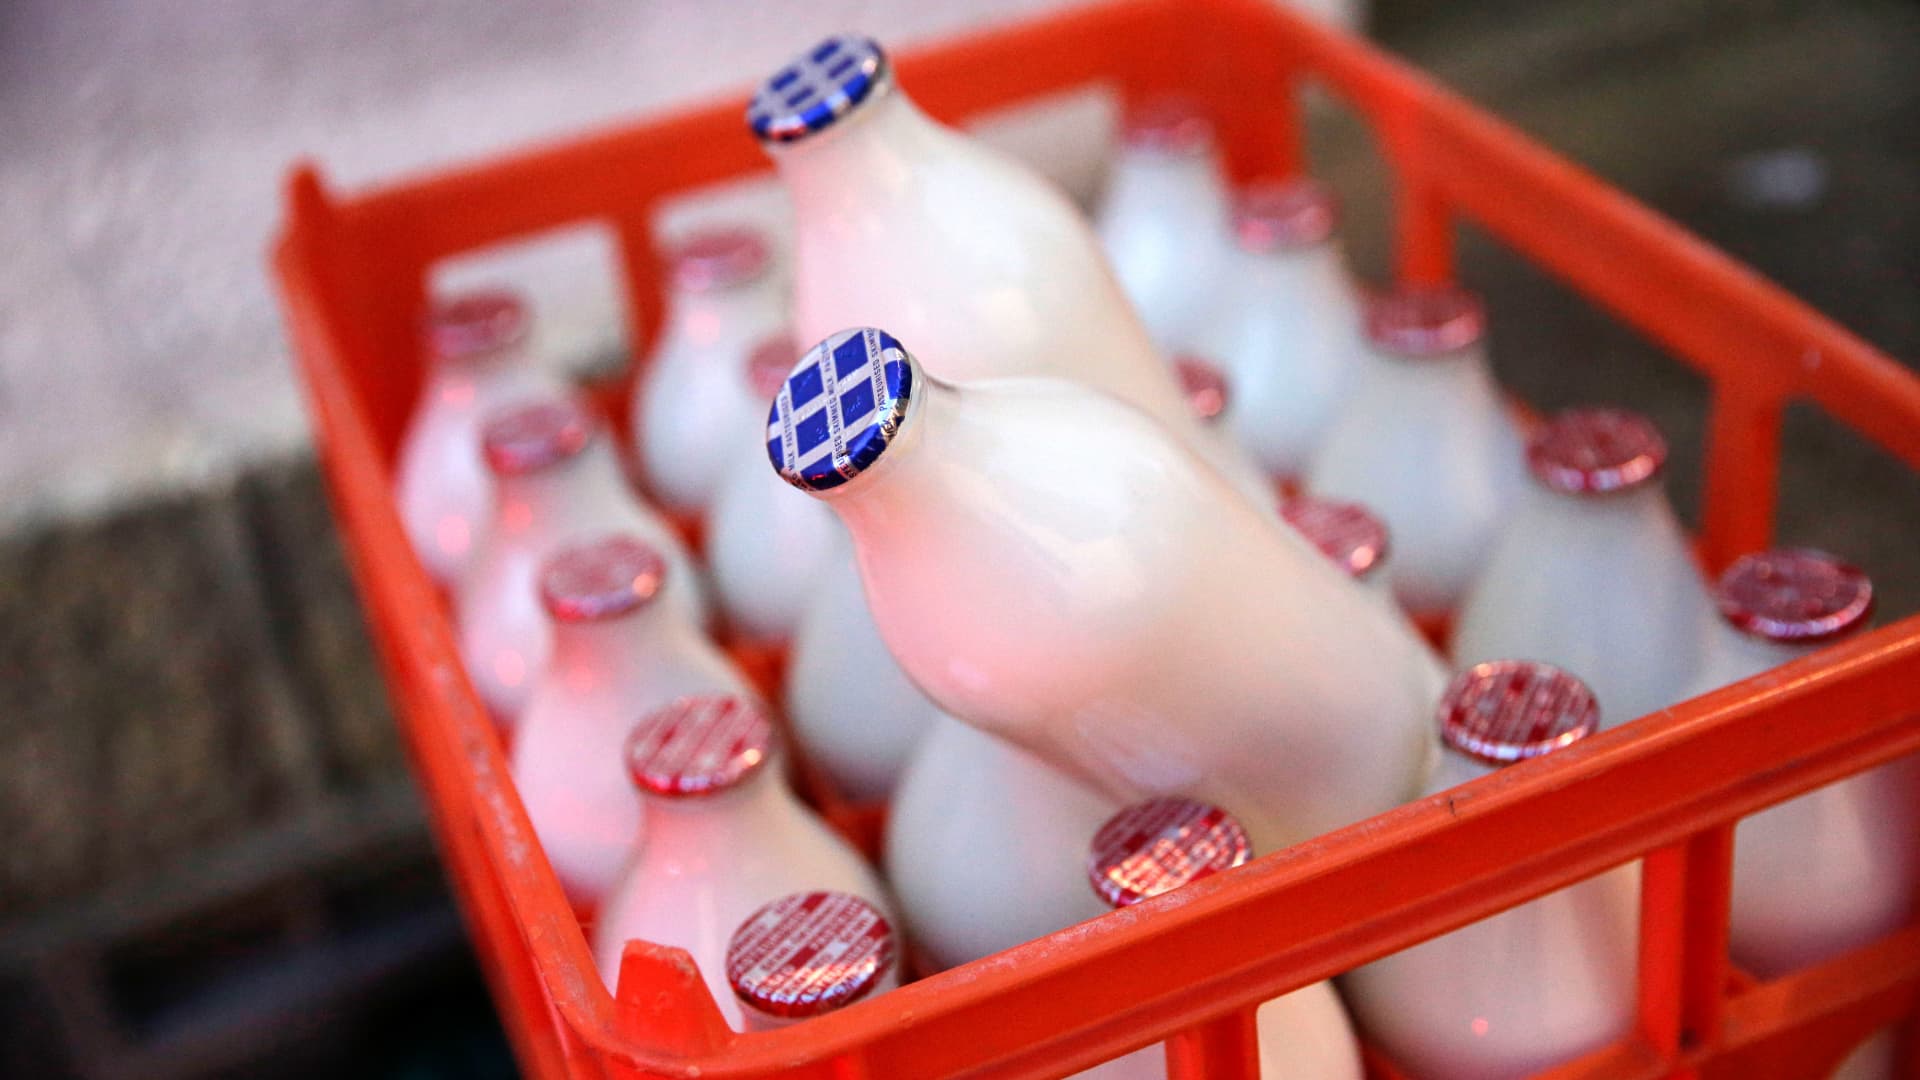 Milk prices in the world’s dairy powerhouse India have spiked 15%